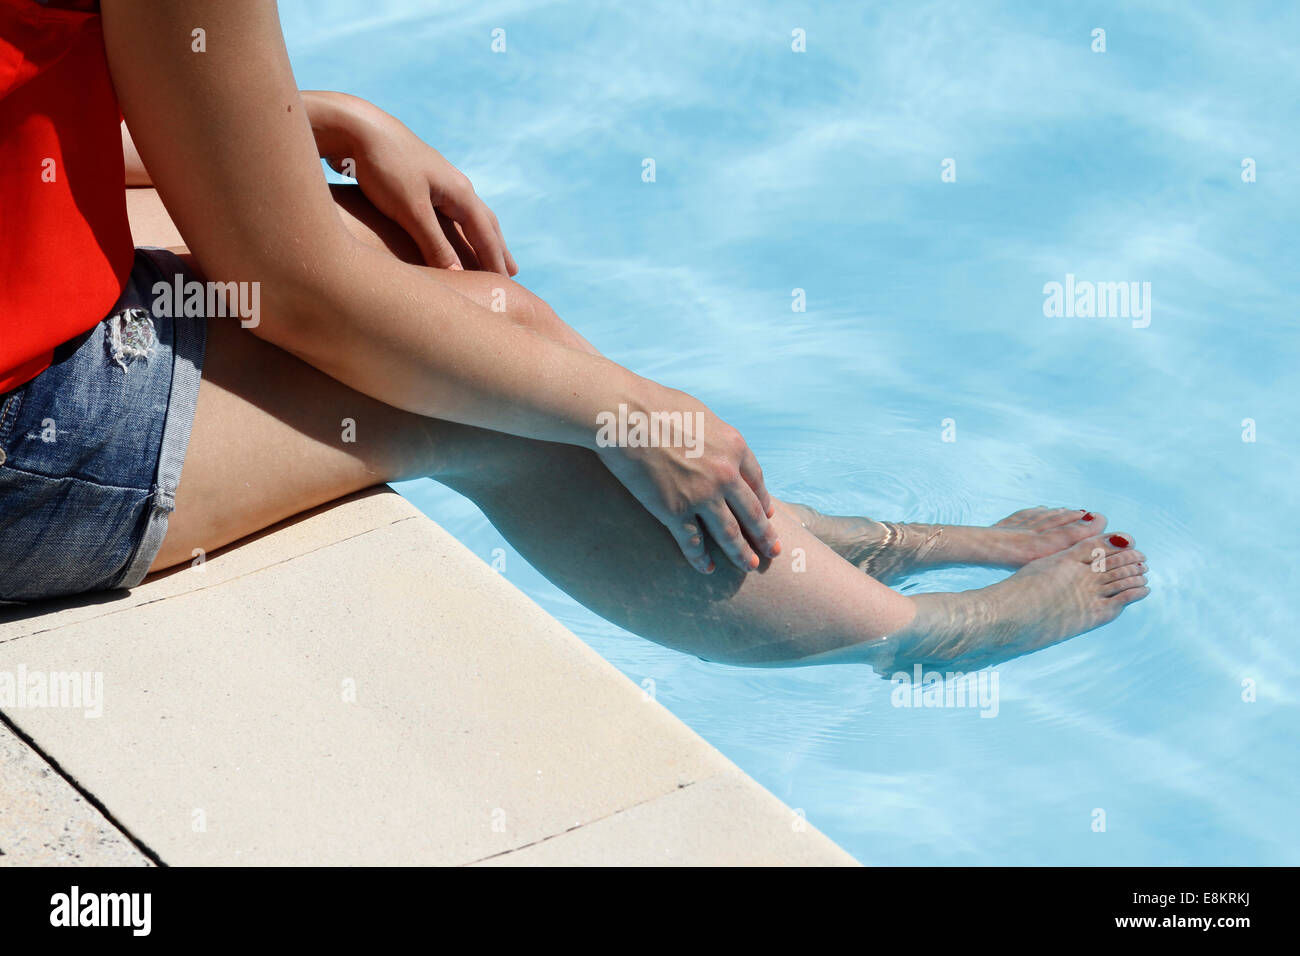 A young woman sitting on the edge of a swimming pool with her feet in the water. Stock Photo